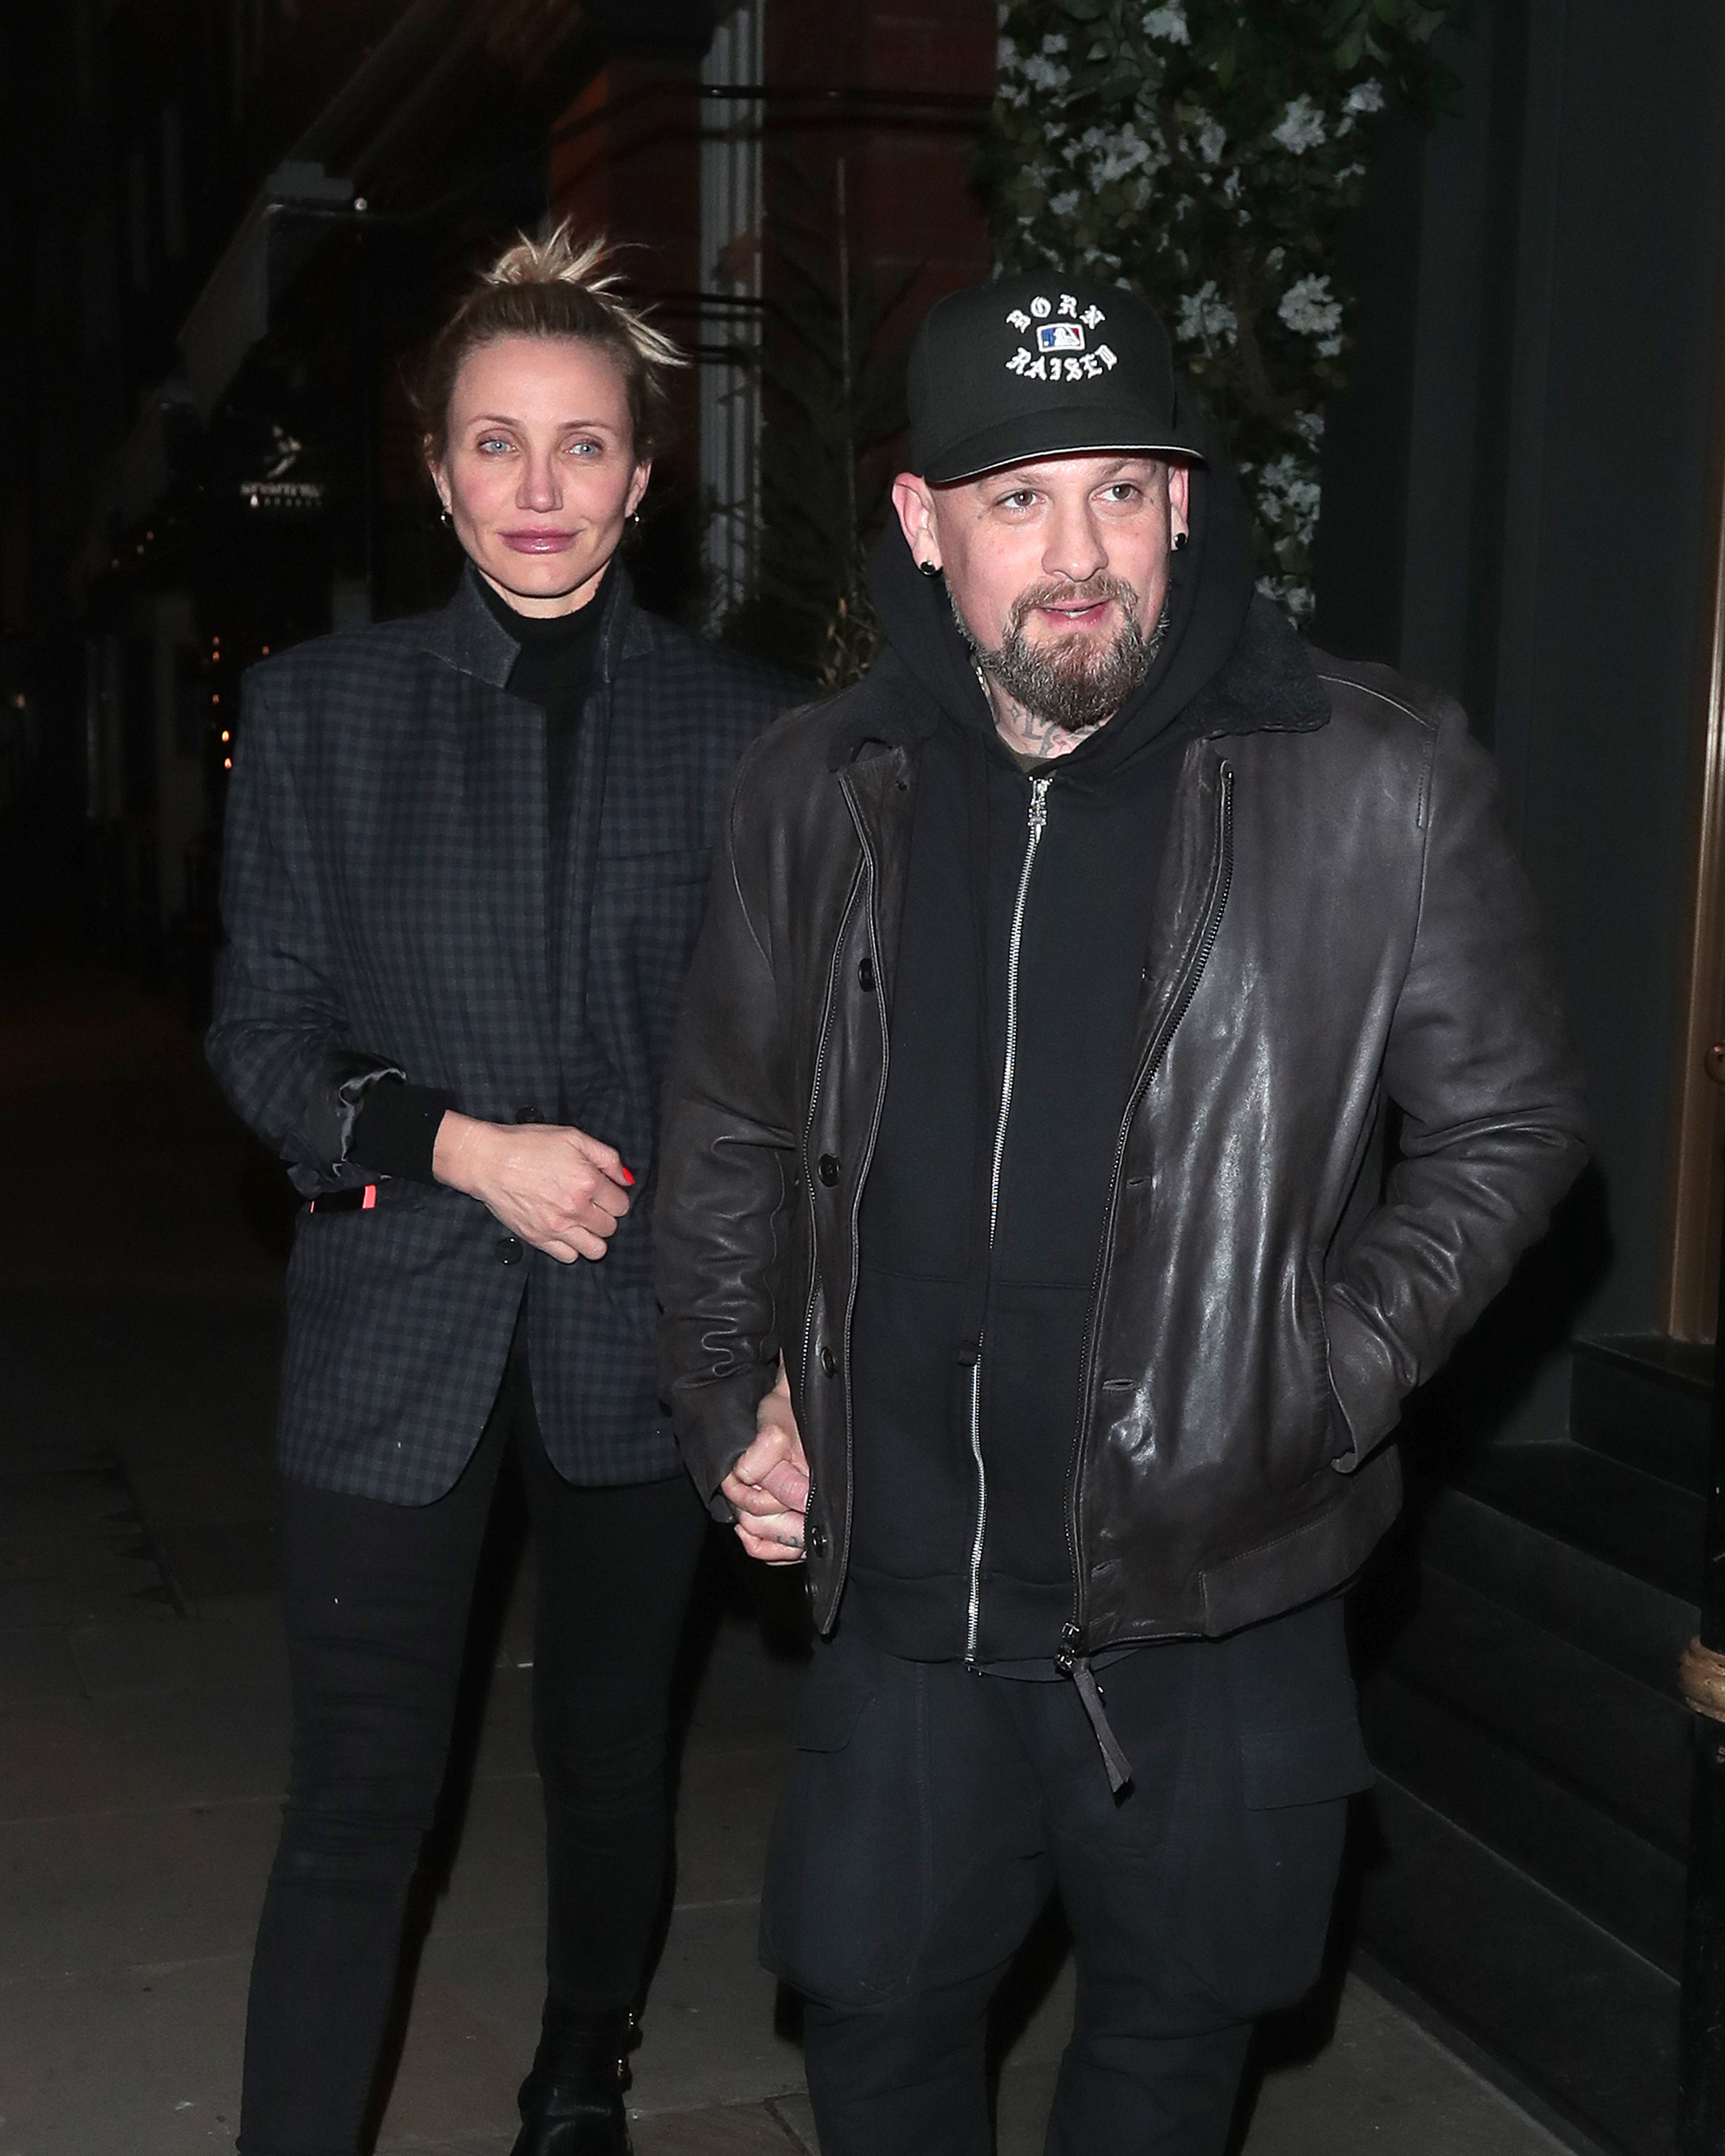 Cameron Diaz and Benji Madden in London, England on December 02, 2022 | Source: Getty Images